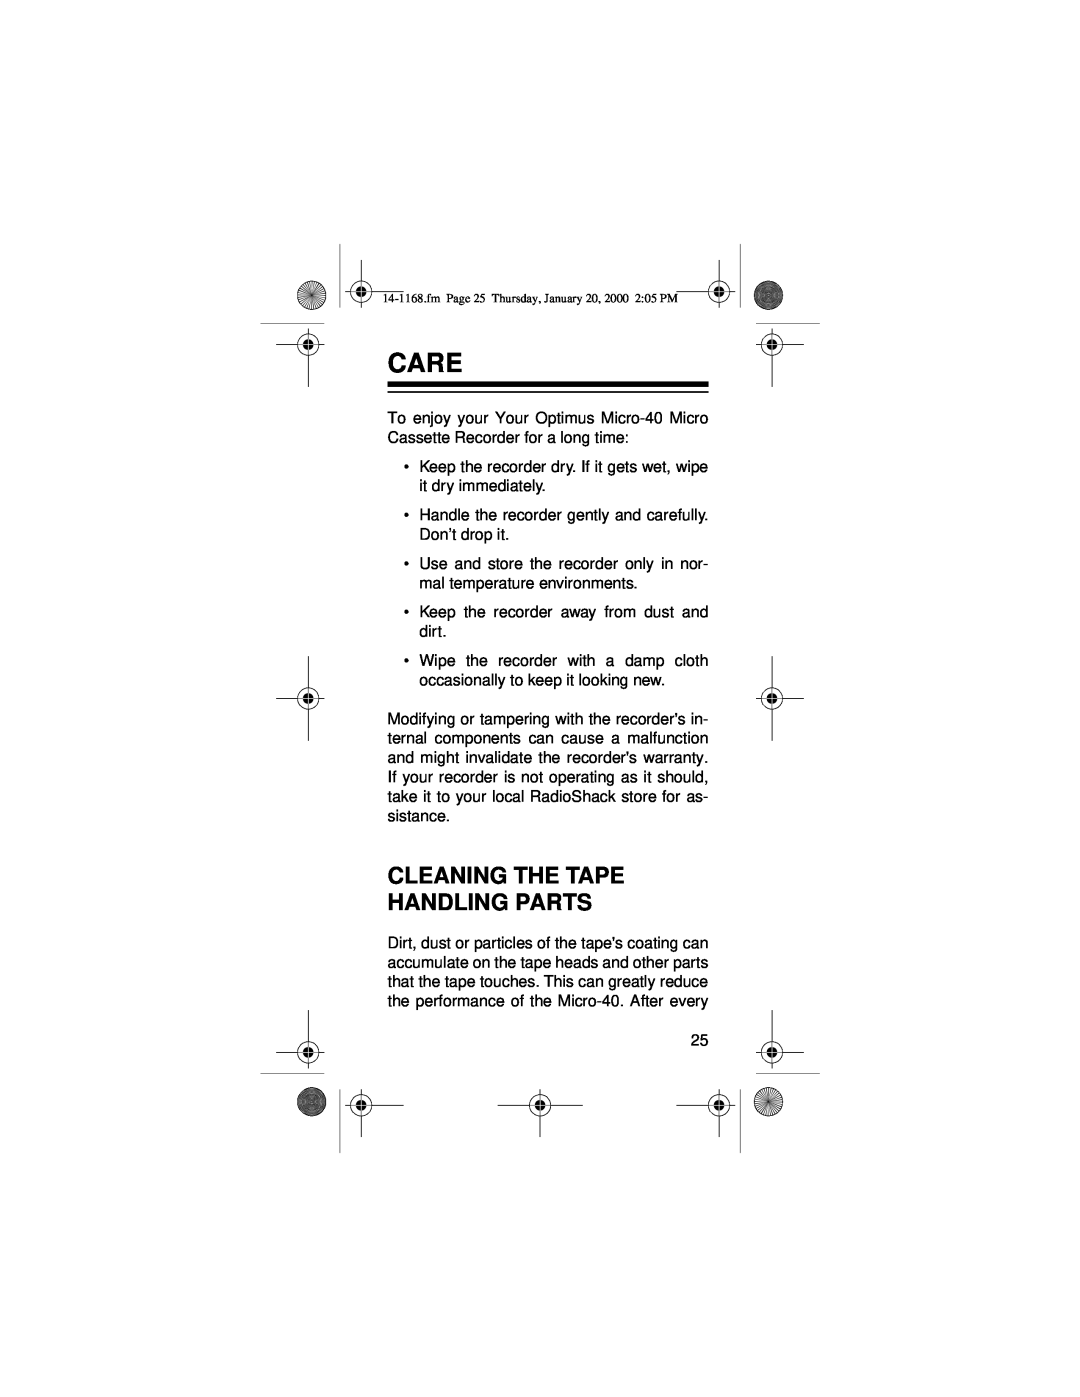 Optimus Micro-40, 14-1168 owner manual Care, Cleaning The Tape Handling Parts 